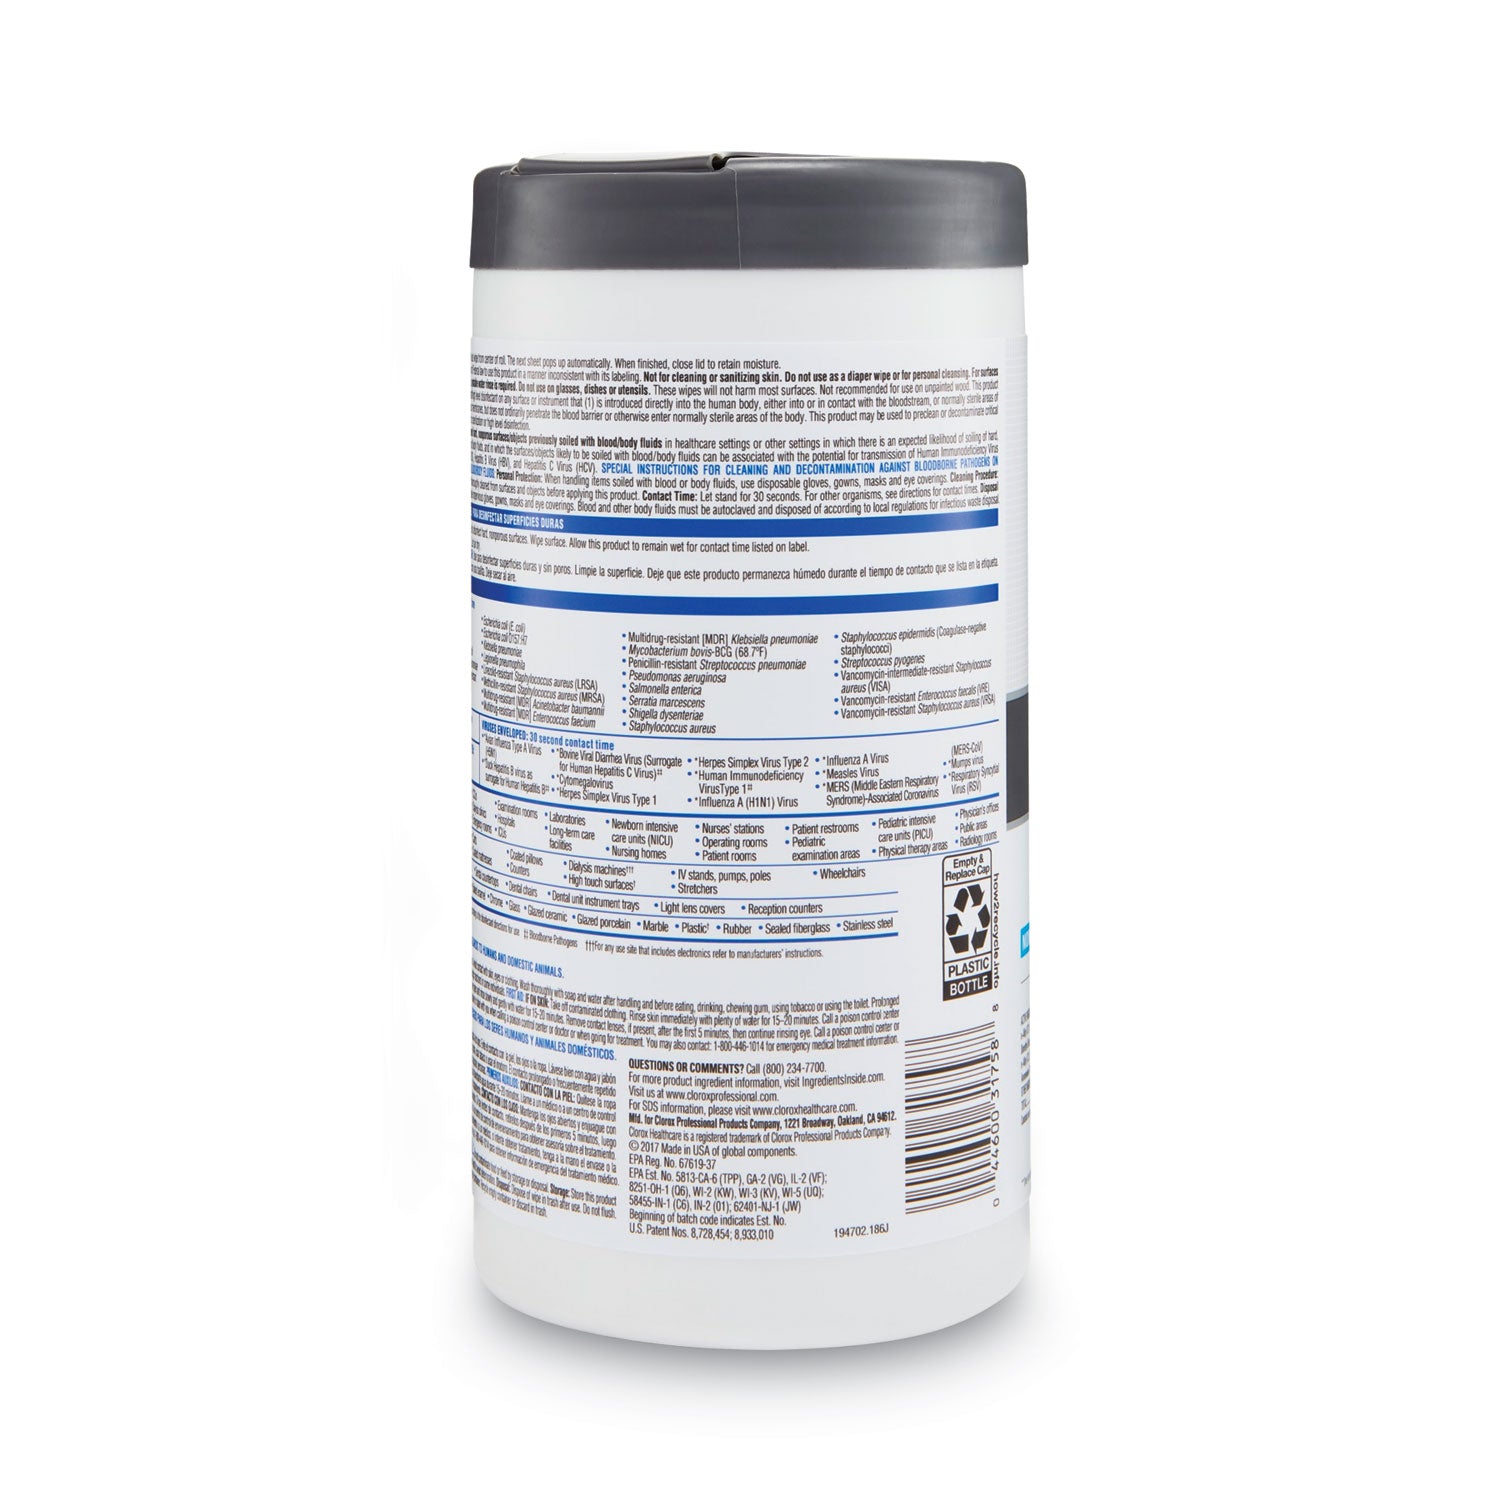 versasure-cleaner-disinfectant-wipes-1-ply-675-x-8-fragranced-white-150-canister-6-canisters-carton_clo31758 - 3